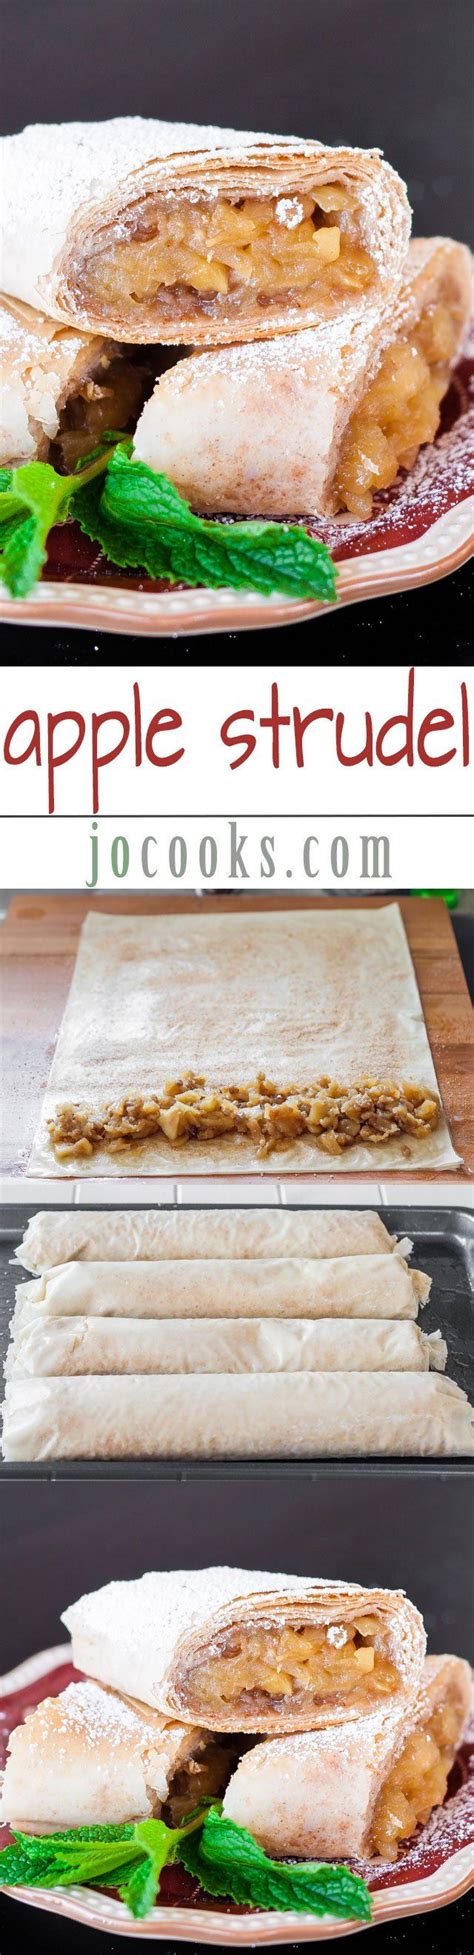 Phyllo dough or filo pastry, which means sheet in greek, refers to the pastry that is wrapped around savoury and sweet pies and comes in many regional this recipe is the ideal for beginners, as the dough stretches out really easily. Apple Strudel - This amazing recipe will make you enjoy the classic taste of Austrian-style ...